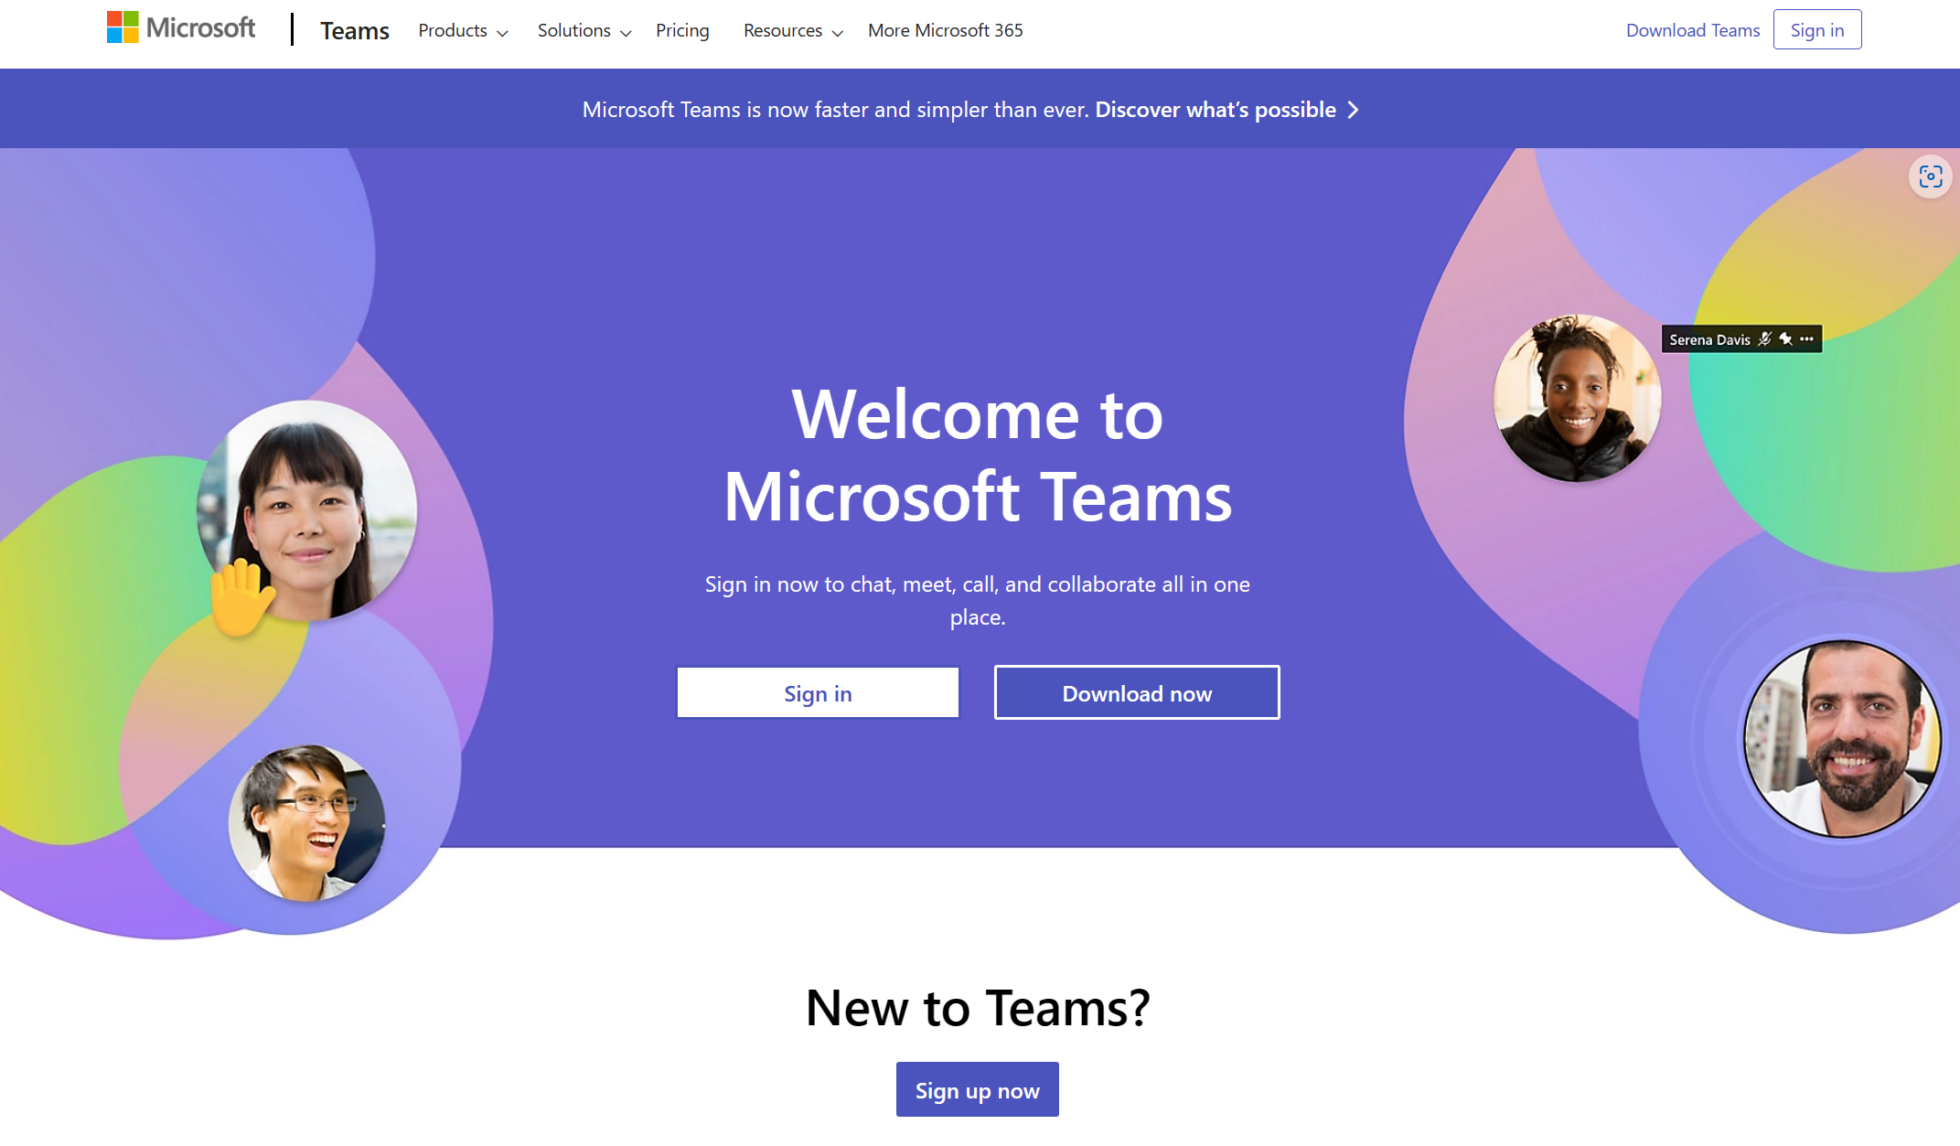 MS Teams is one of the most popular free video calling tools